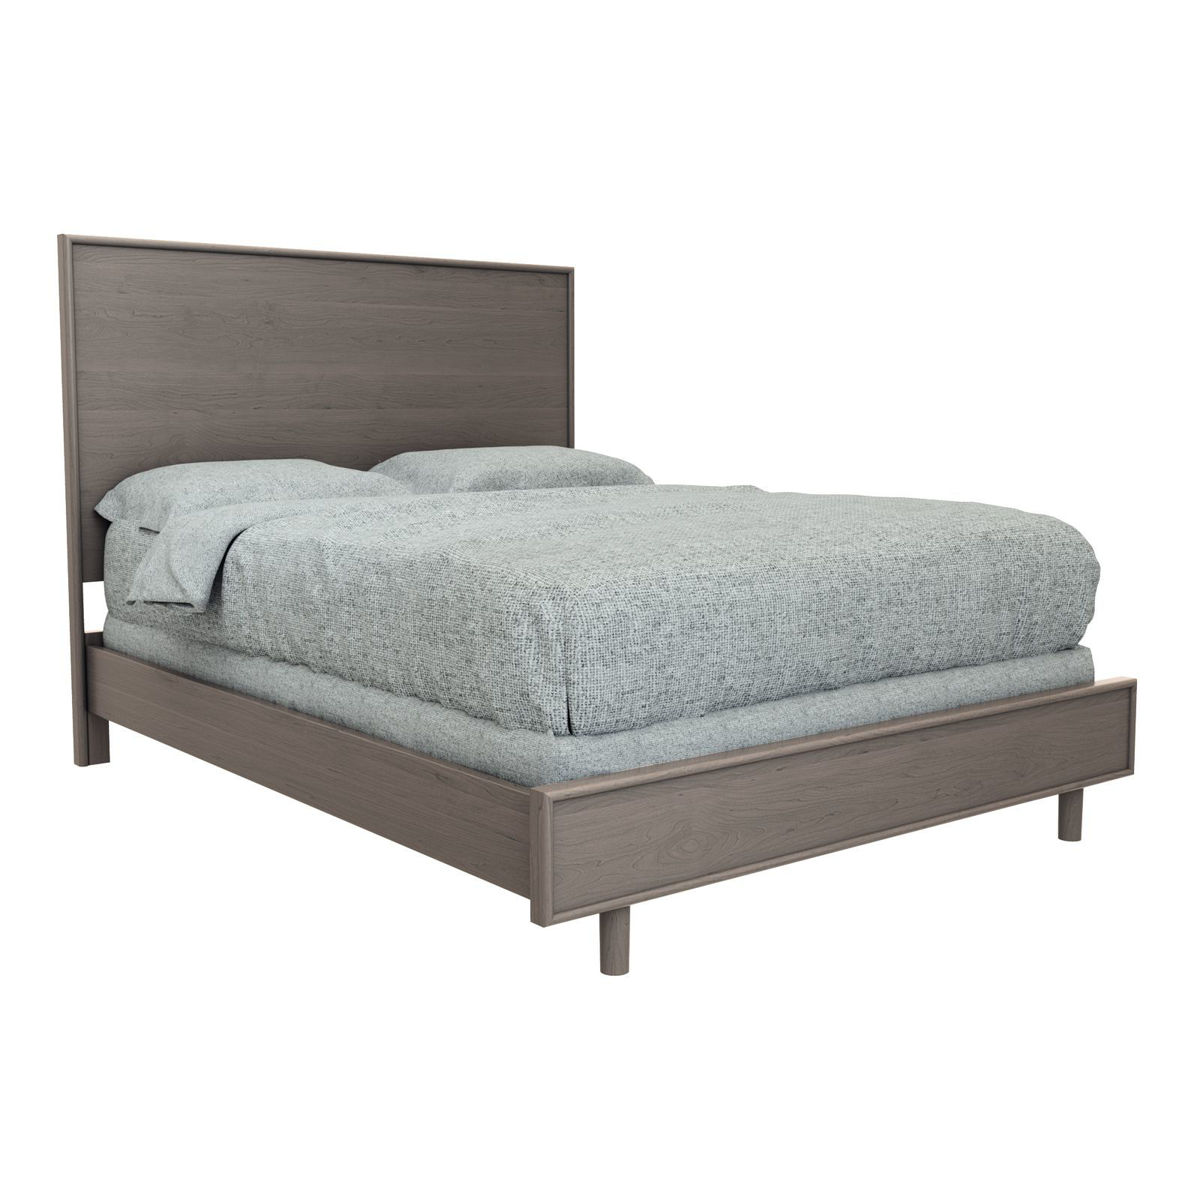 Picture of Amesbury Queen Bed